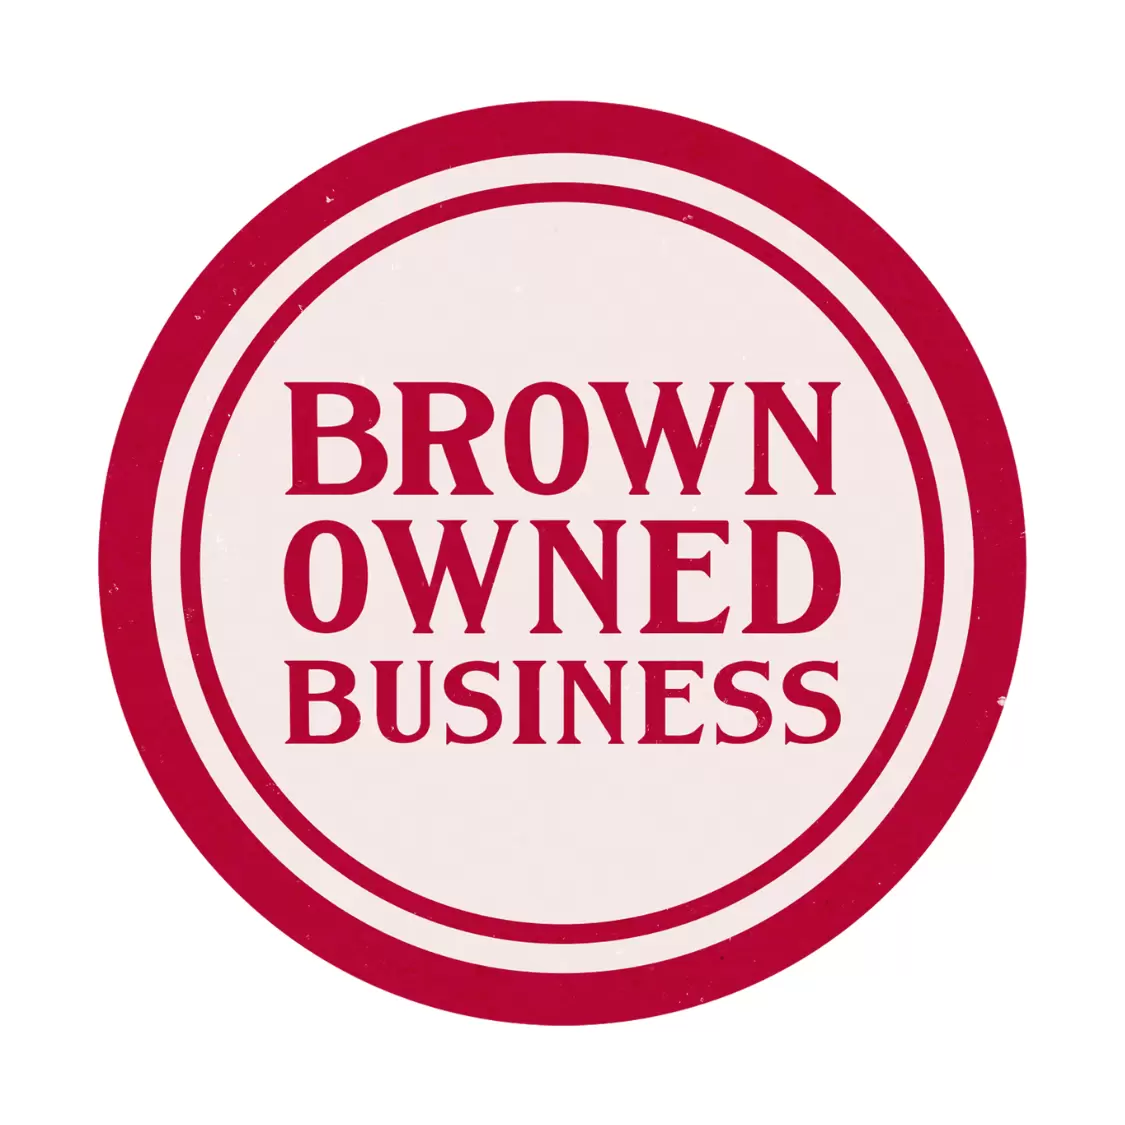 Brown owned business badge